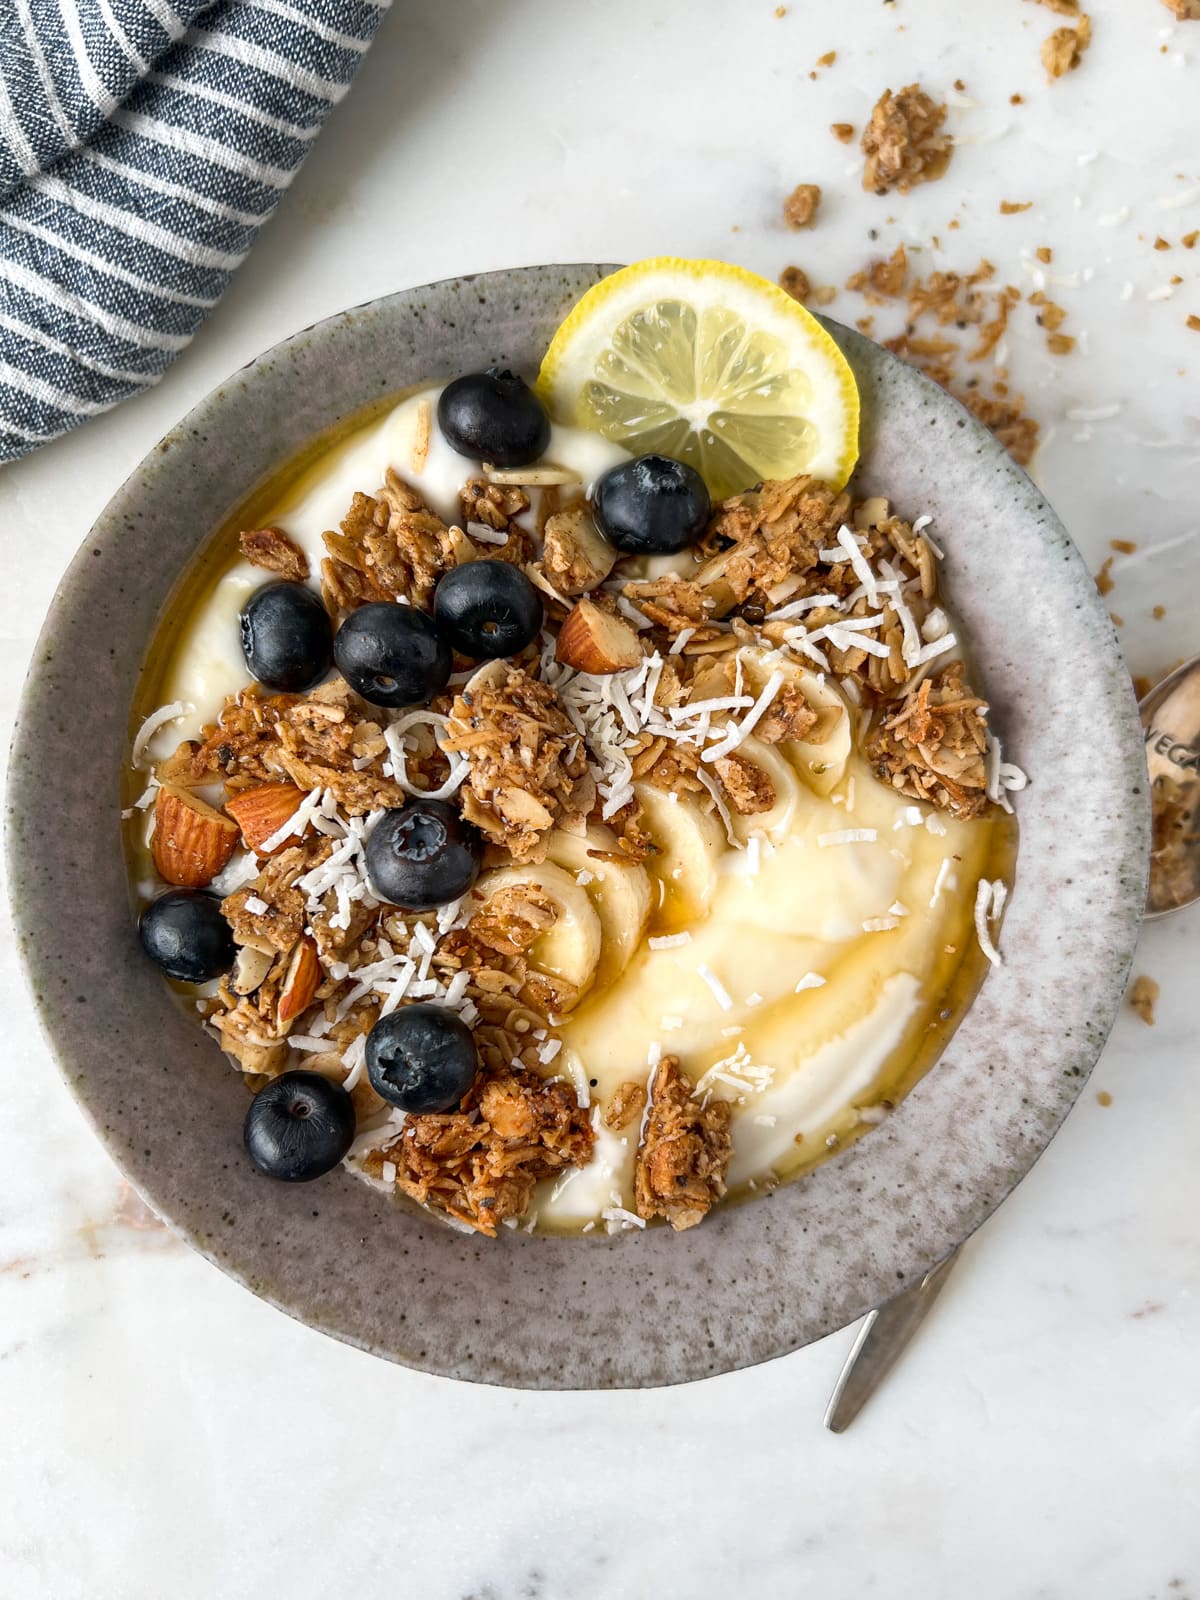 Granola and lemon yogurt bowl covered in blueberries with a spoon and granola crumbs on a table.